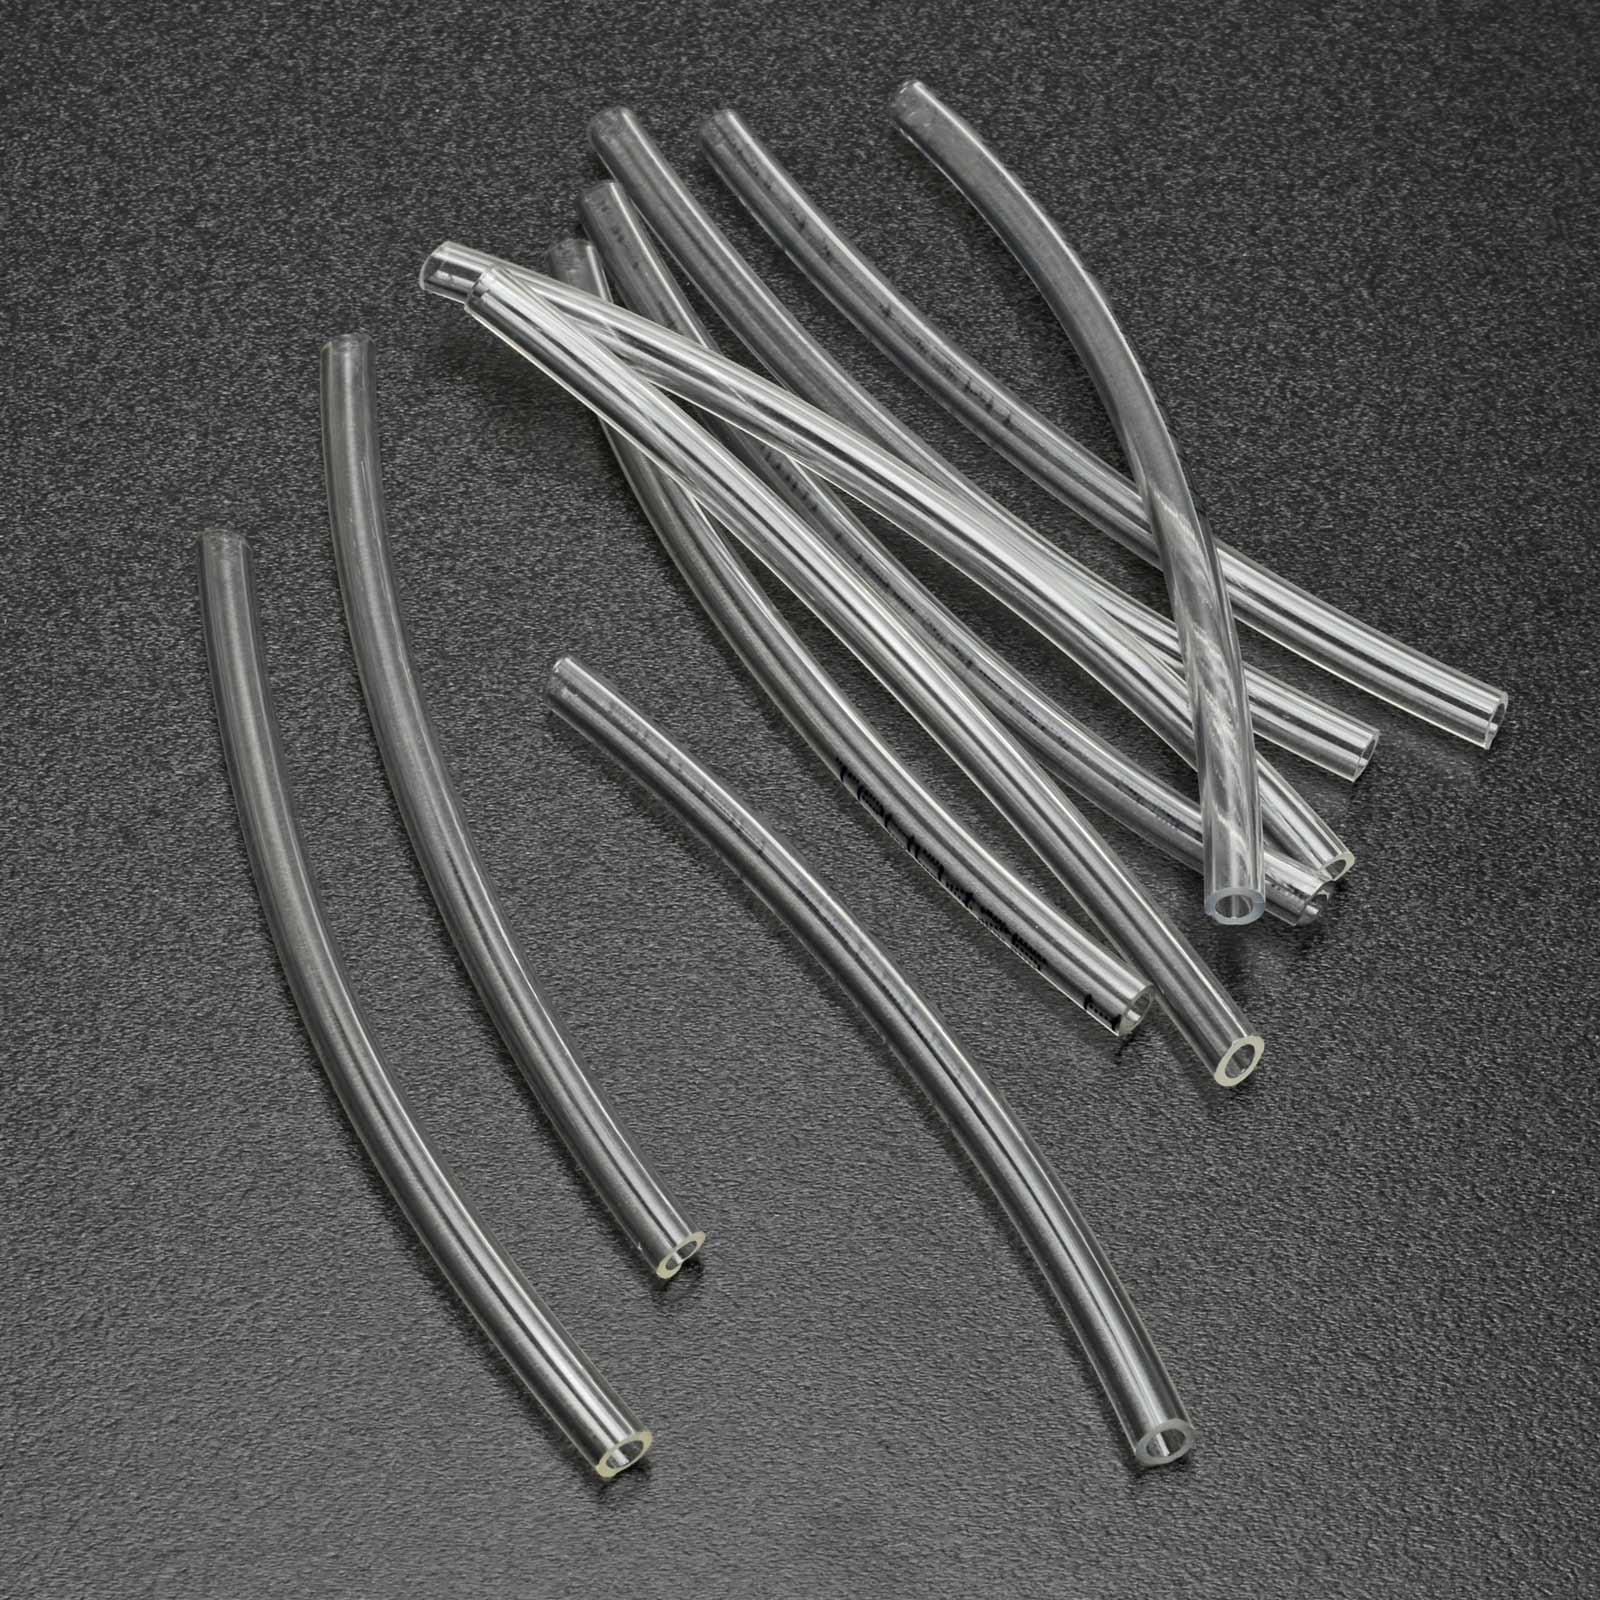 Replacement Siphon Tubes for use with item 91106 0.8mm Nozzle